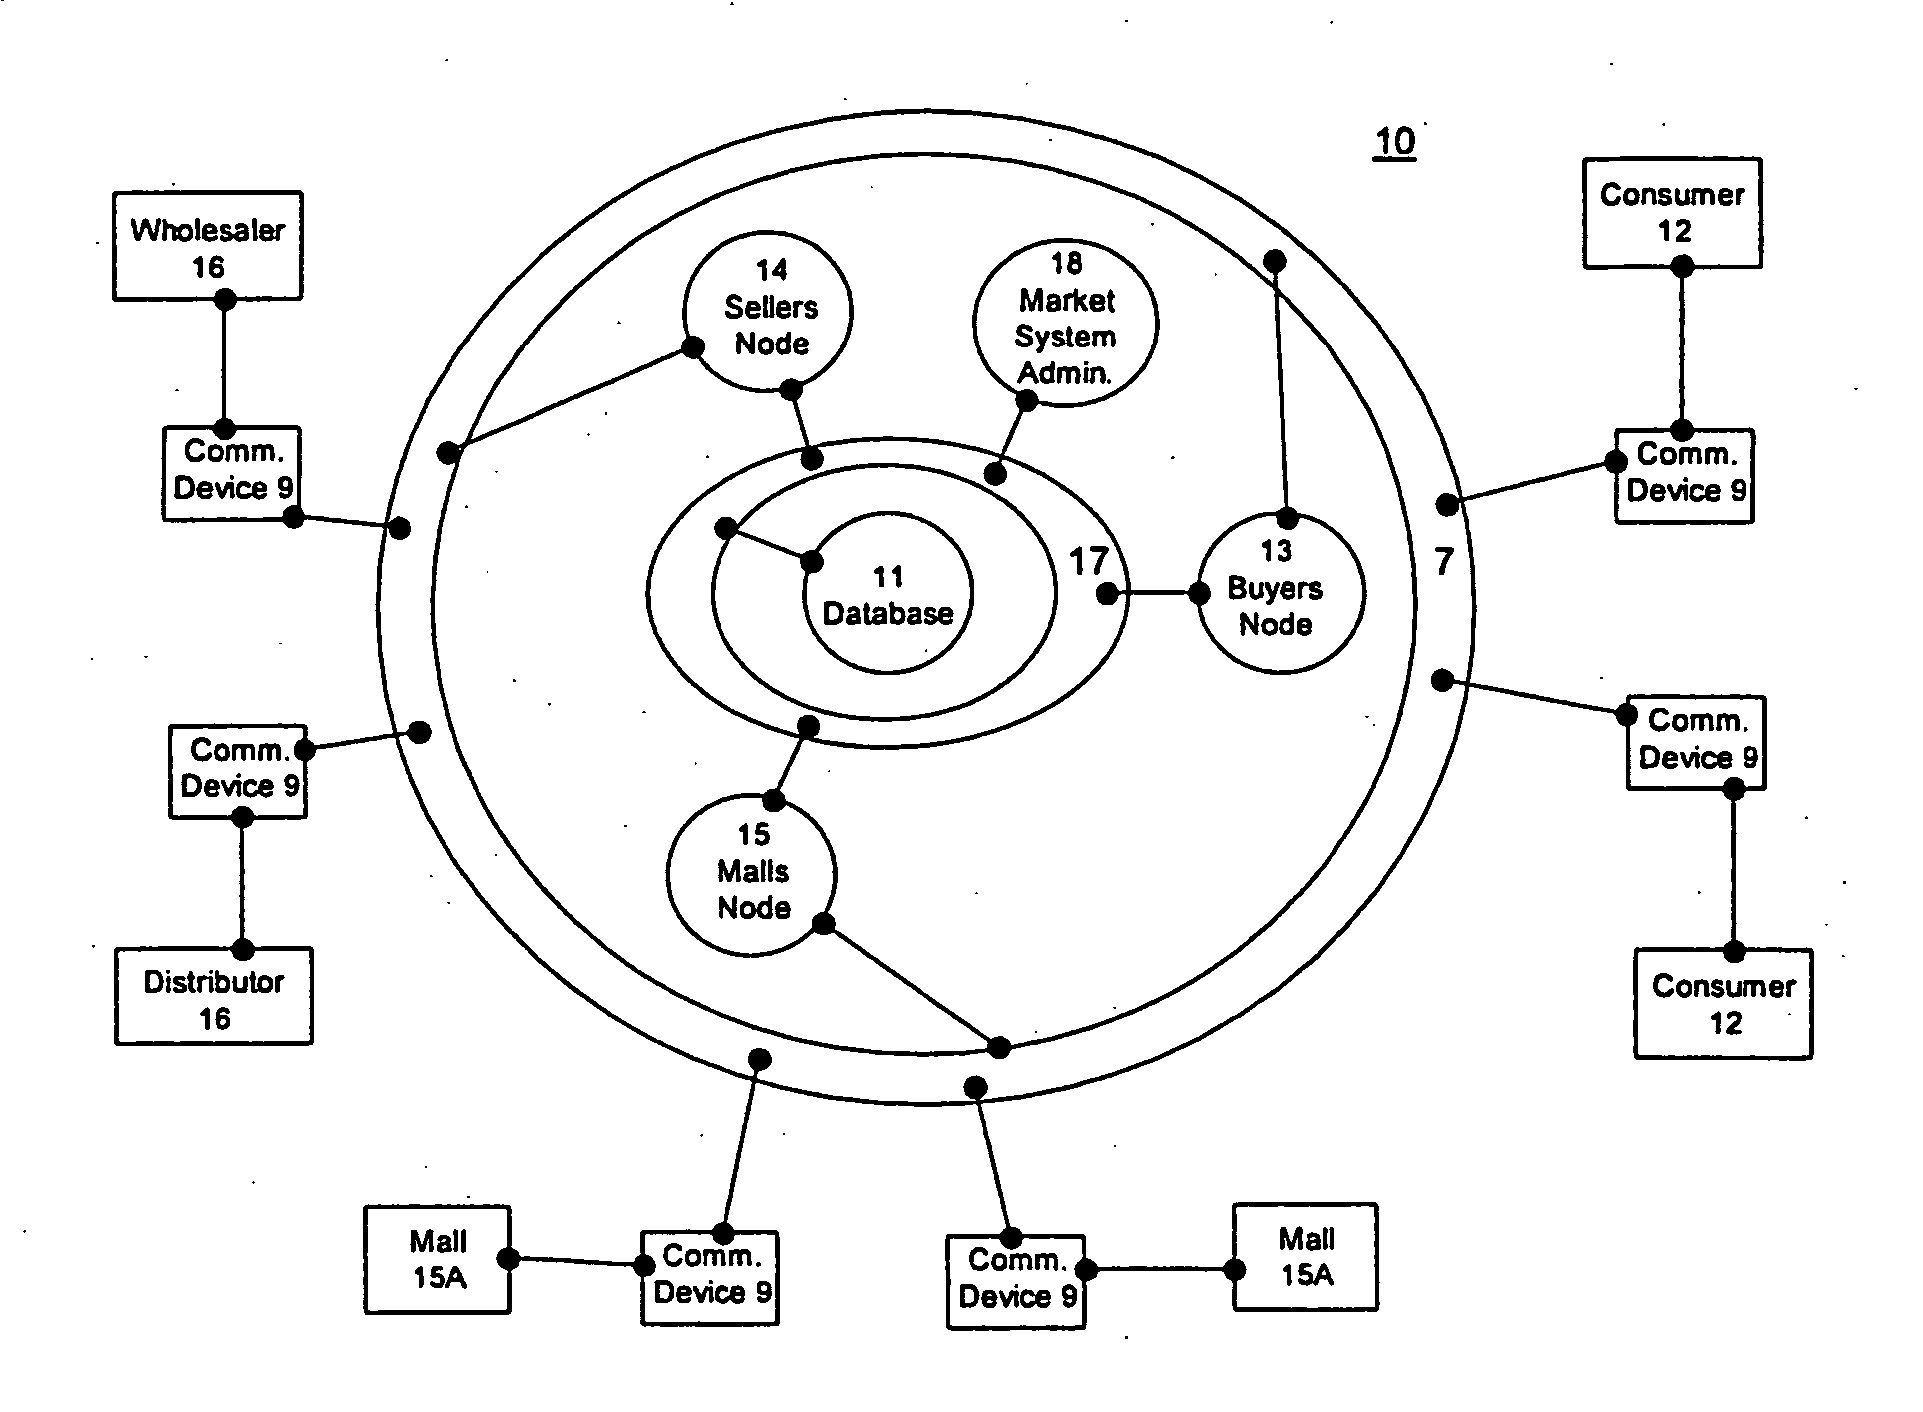 Method and system of an integrated business topography and virtual 3D network portal